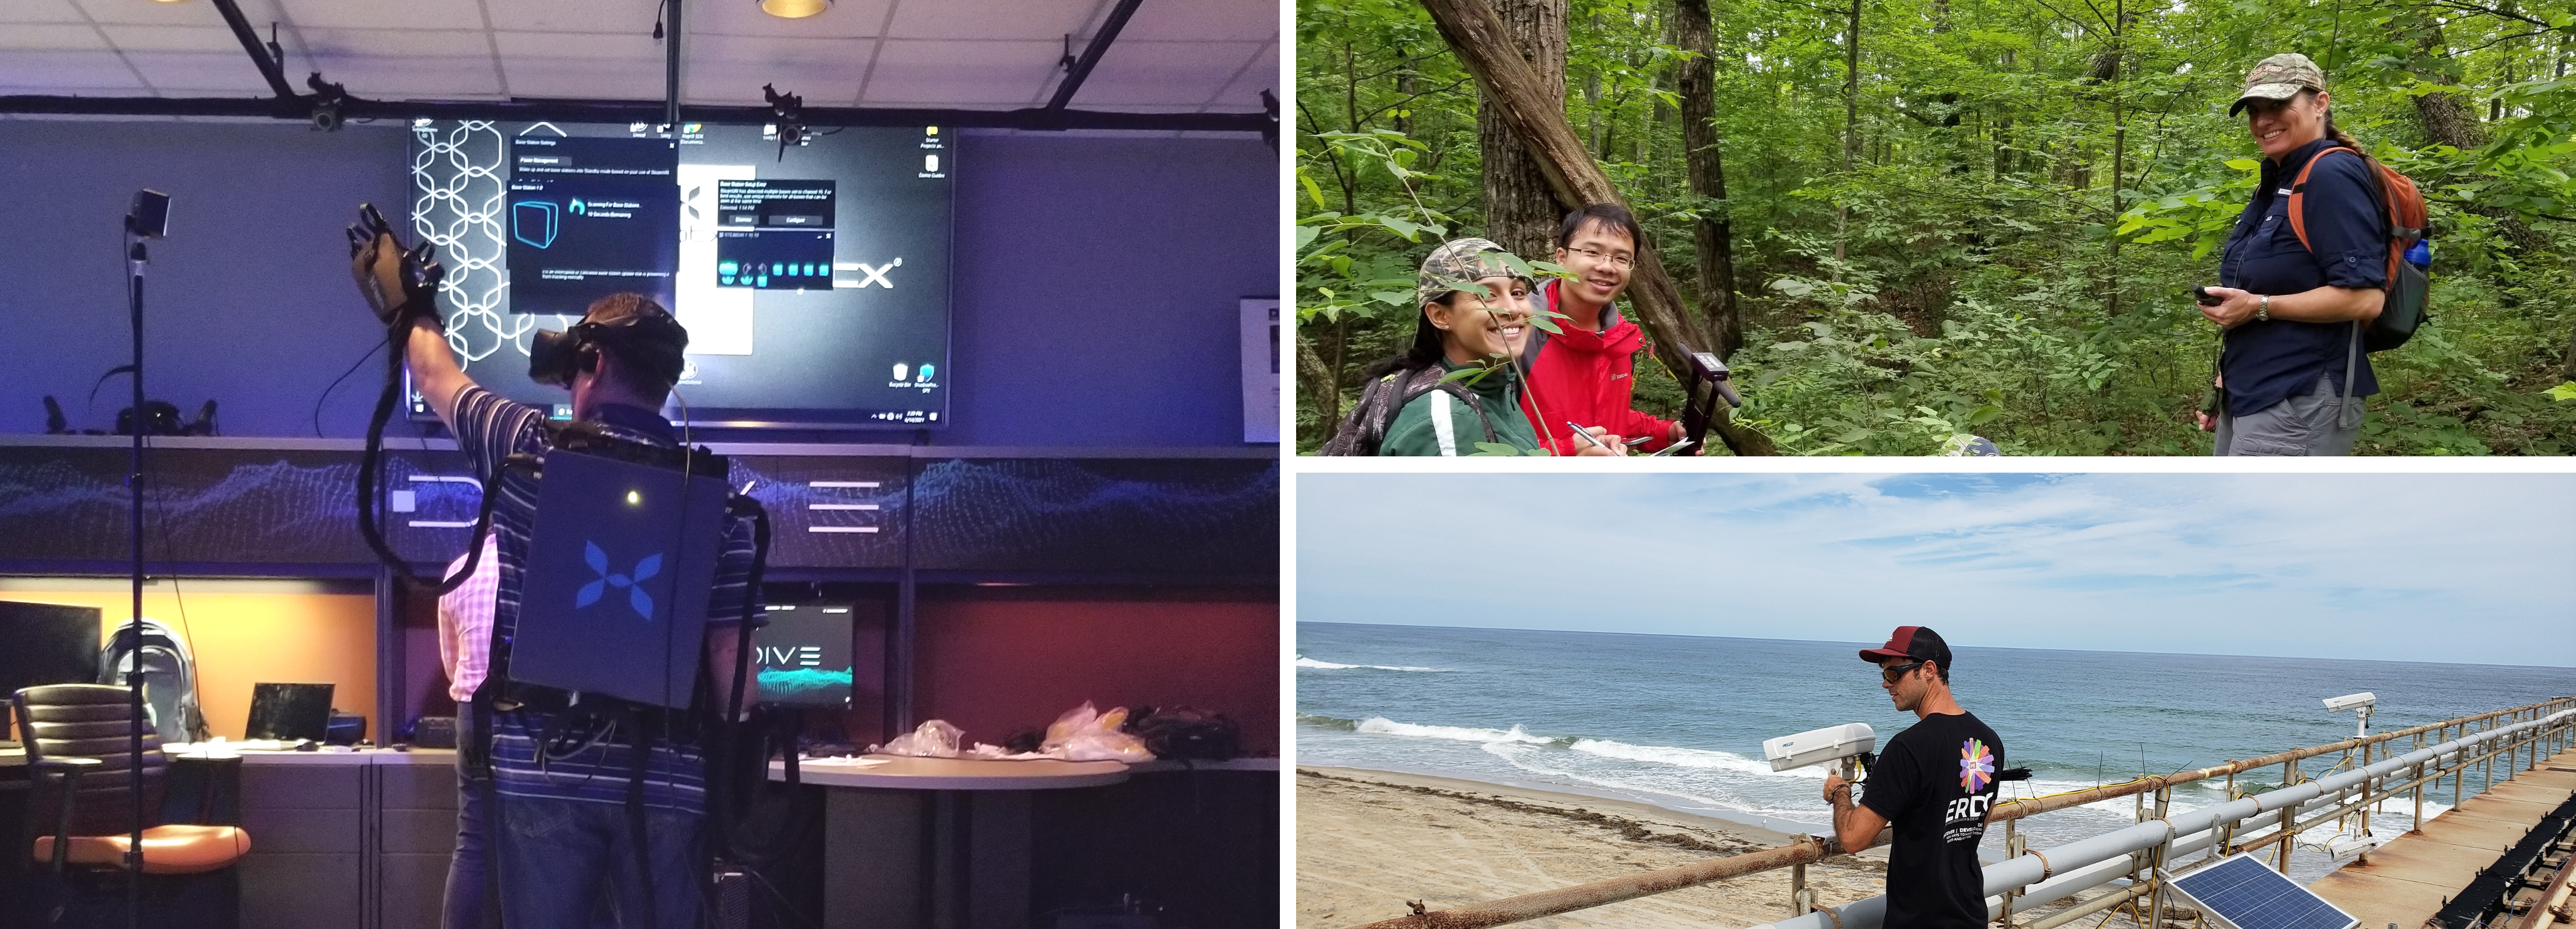 A grid of three images depicting different ERDC locations. On the left is a team member using virtual reality in a laboratory. On the top right are three team members in a green wooded area. On the bottom right is an ERDC employee standing on a pier over the beach.